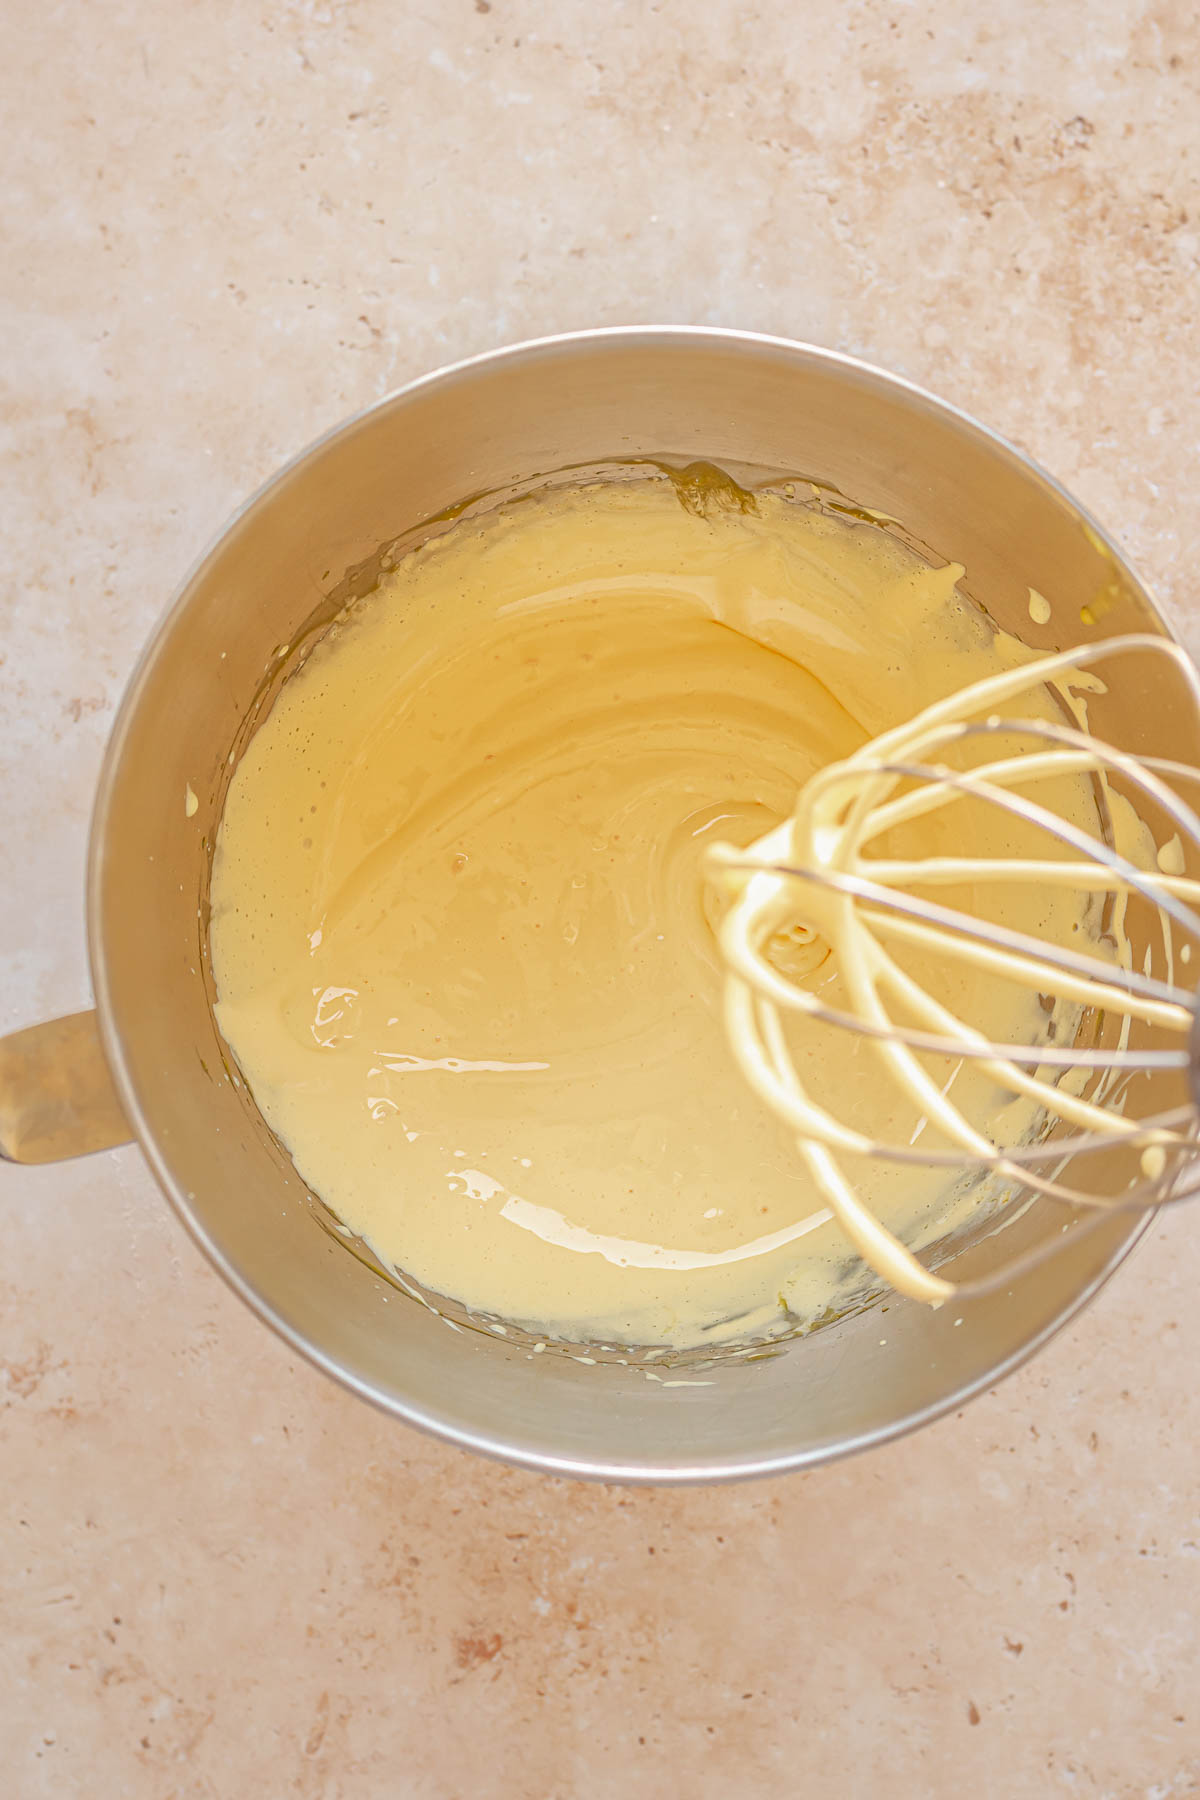 Whipped egg yolks and sugar pale in color in a bowl.